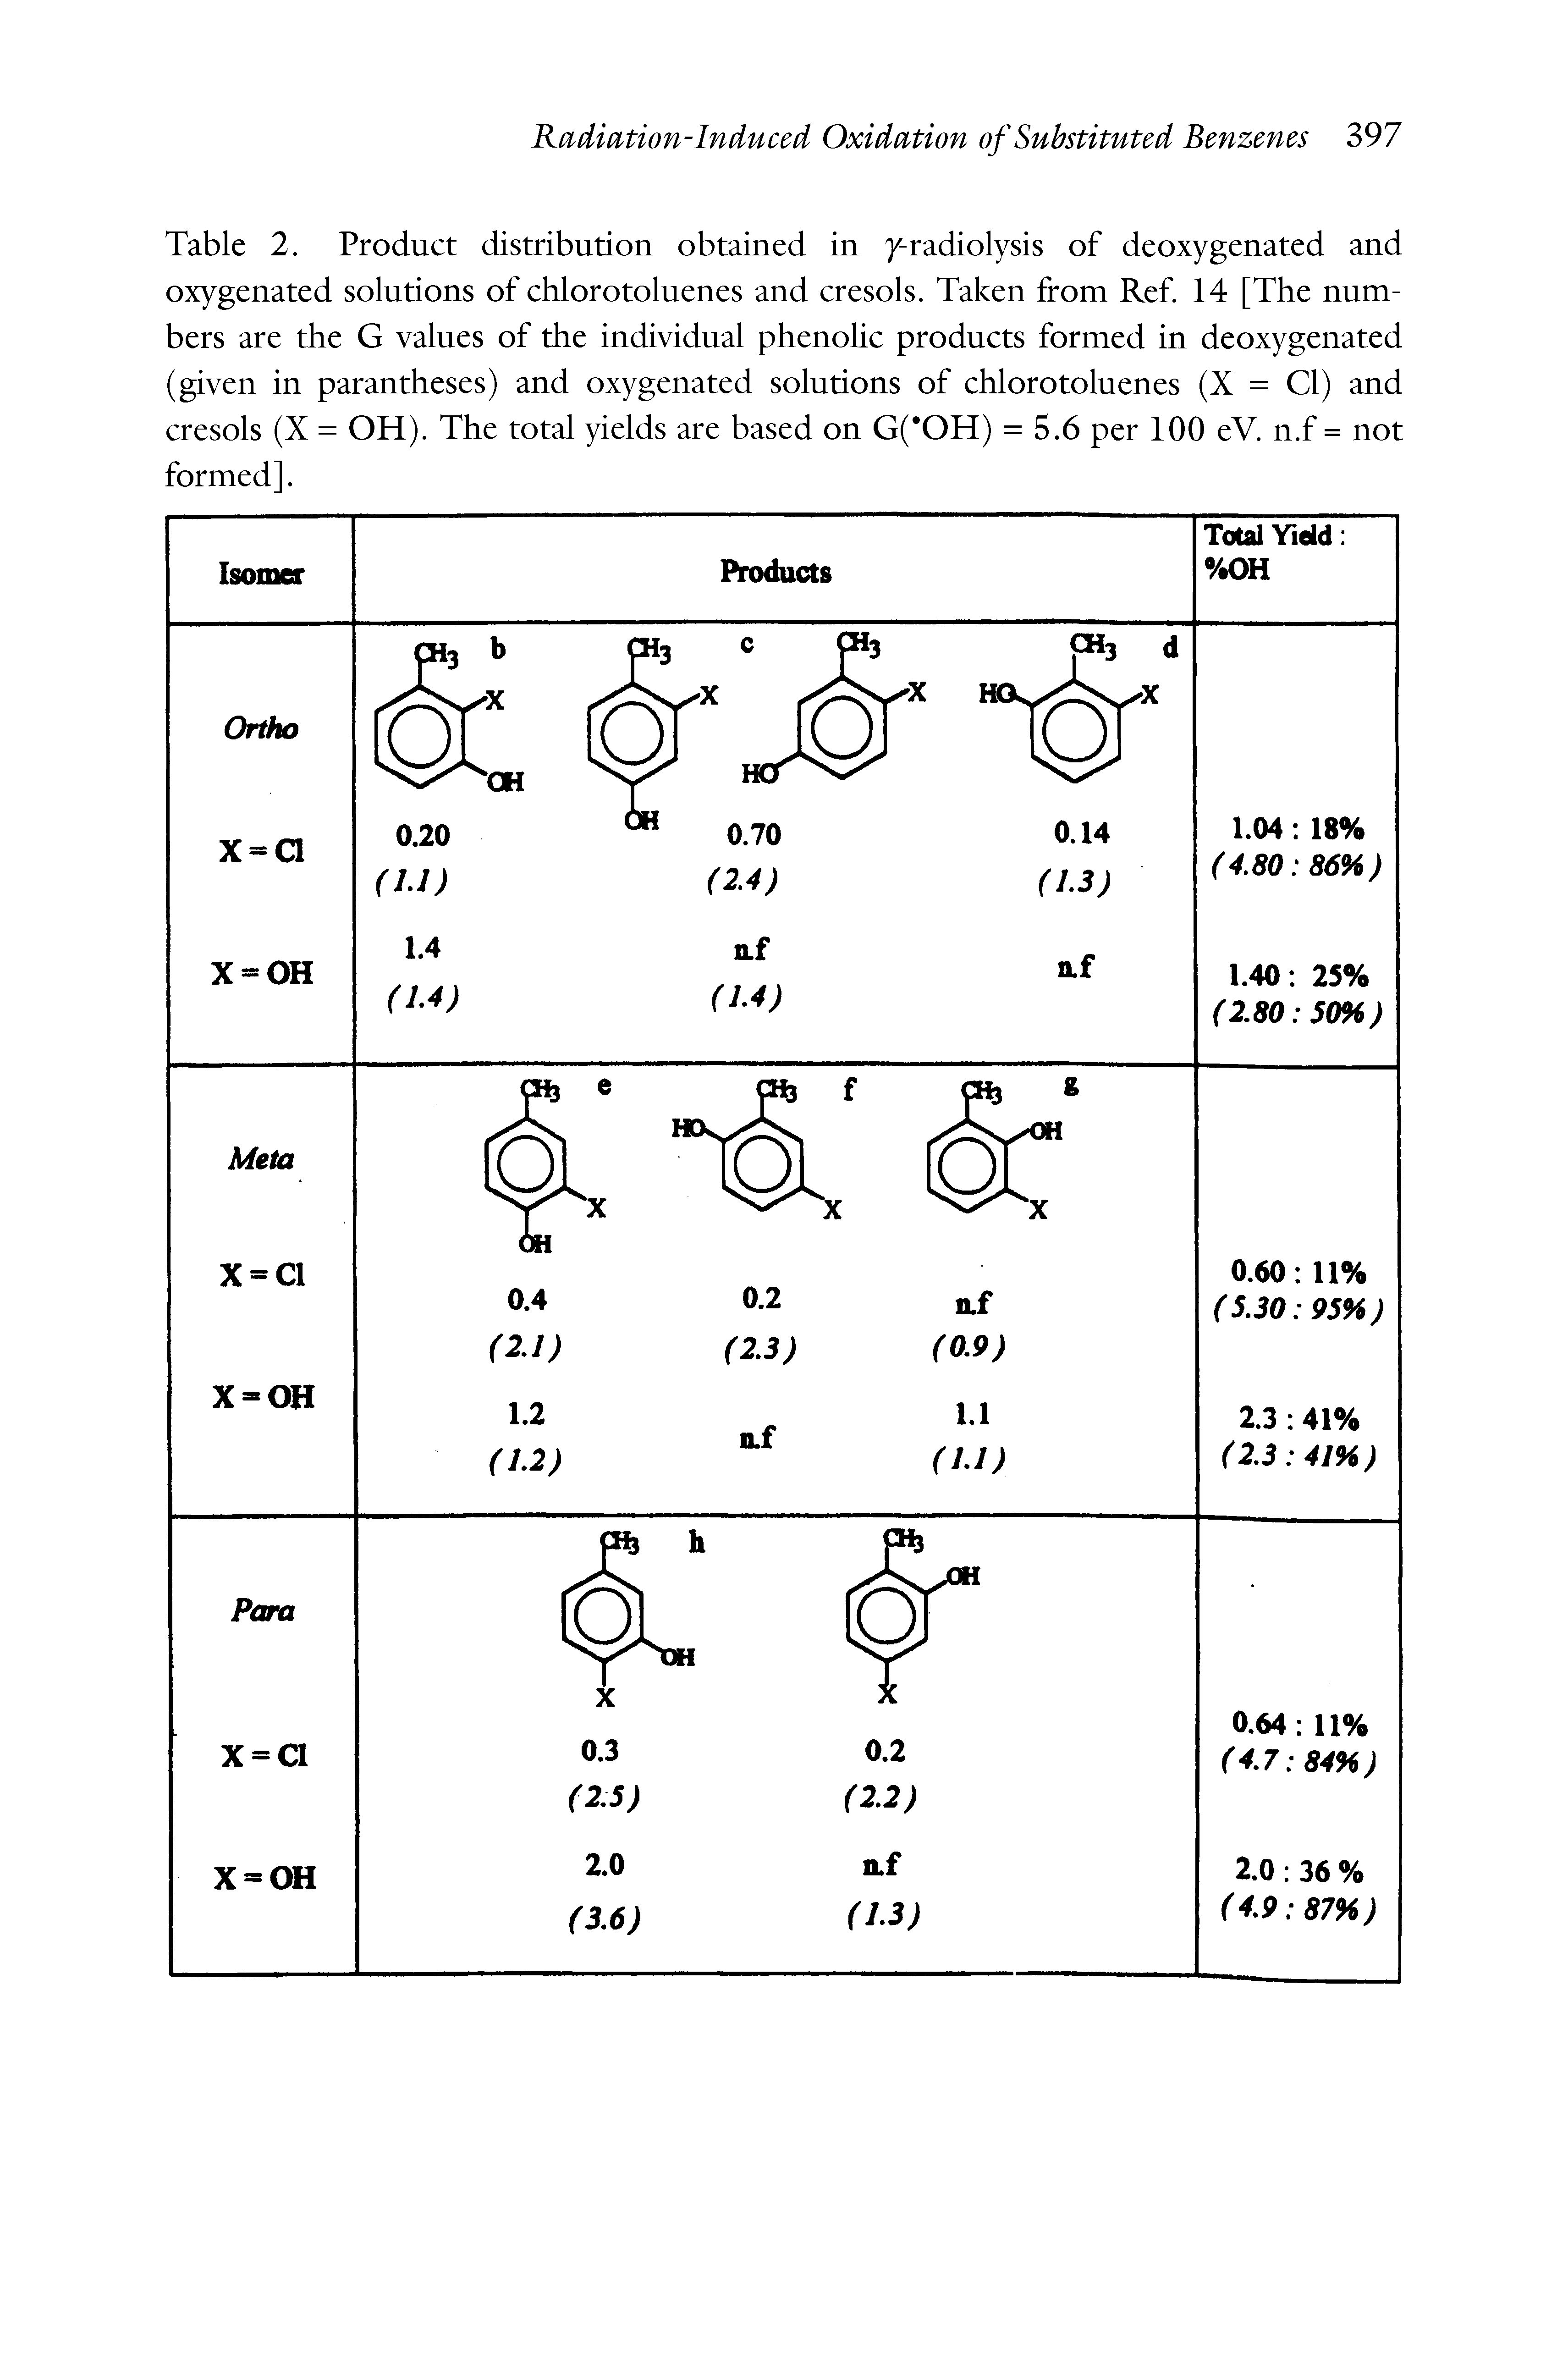 Table 2. Product distribution obtained in 7-radiolysis of deoxygenated and oxygenated solutions of chlorotoluenes and cresols. Taken from Ref 14 [The numbers are the G values of the individual phenolic products formed in deoxygenated (given in parantheses) and oxygenated solutions of chlorotoluenes (X = Cl) and cresols (X = OH). The total yields are based on G( OH) = 5.6 per 100 eV. n.f = not...